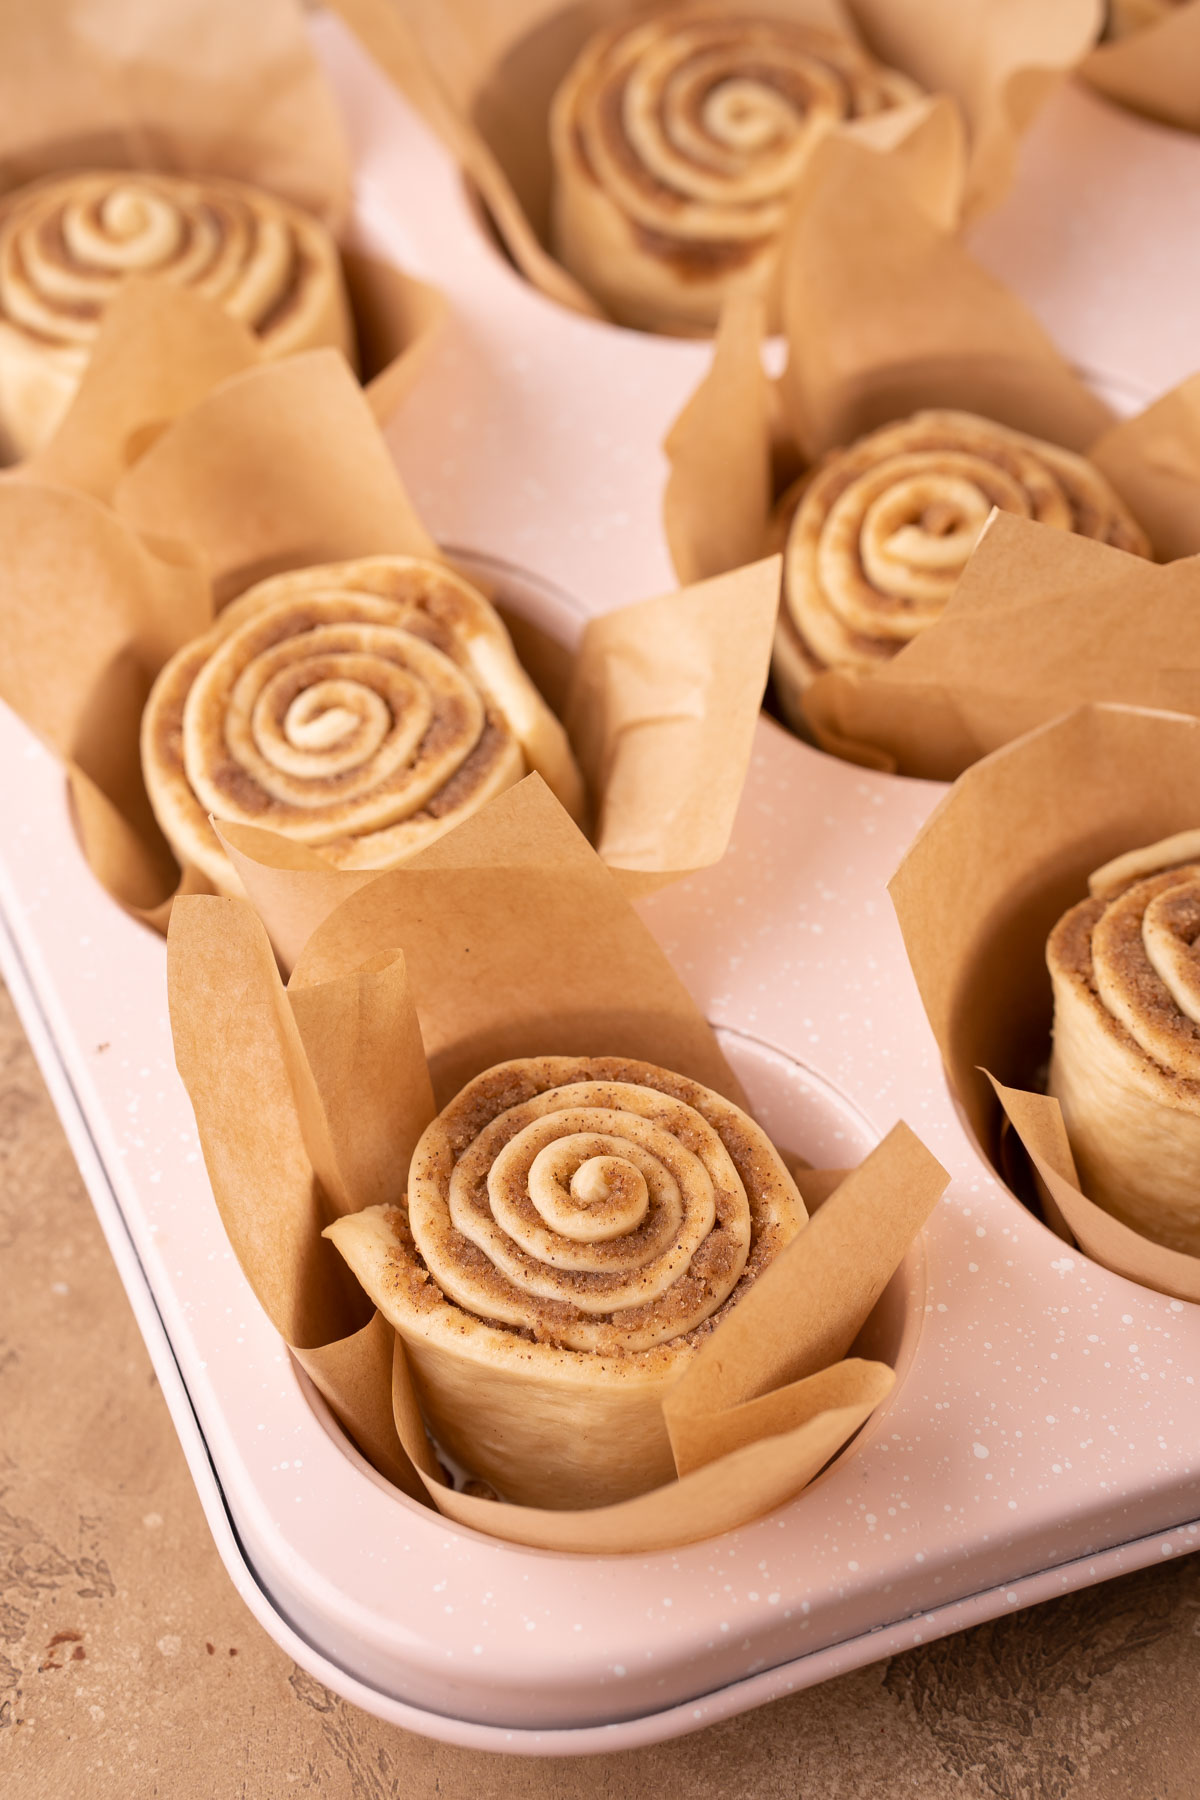 Cinnamon rolls have been rolled up and put in muffins tins ready to bake.